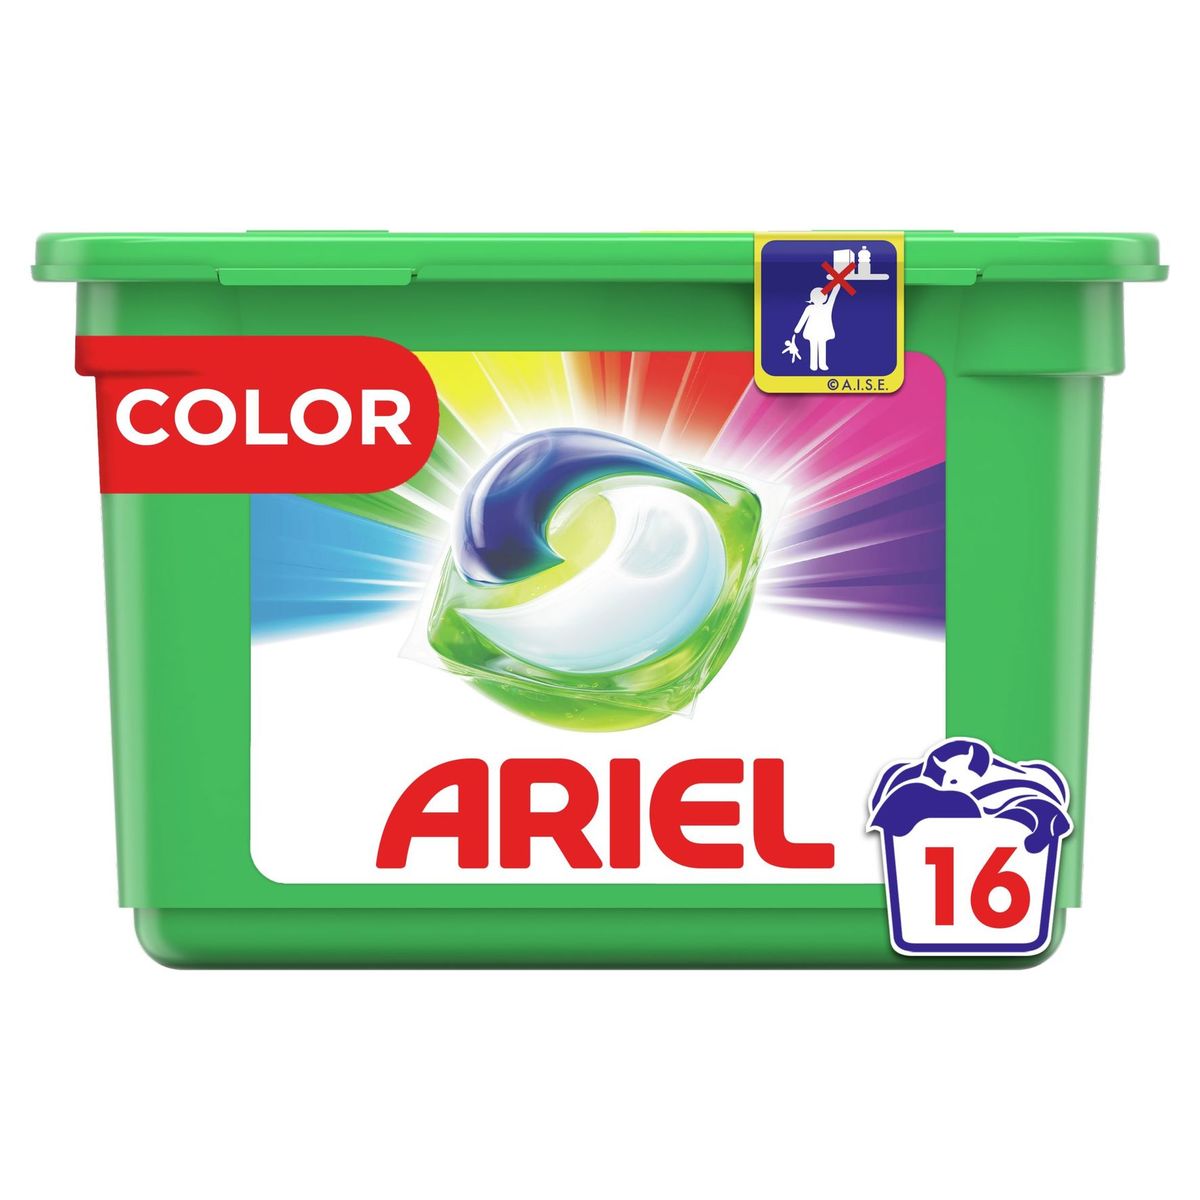 Ariel All-in-1 Pods Colour Wasmiddelcapsules, 16 Wasbeurten